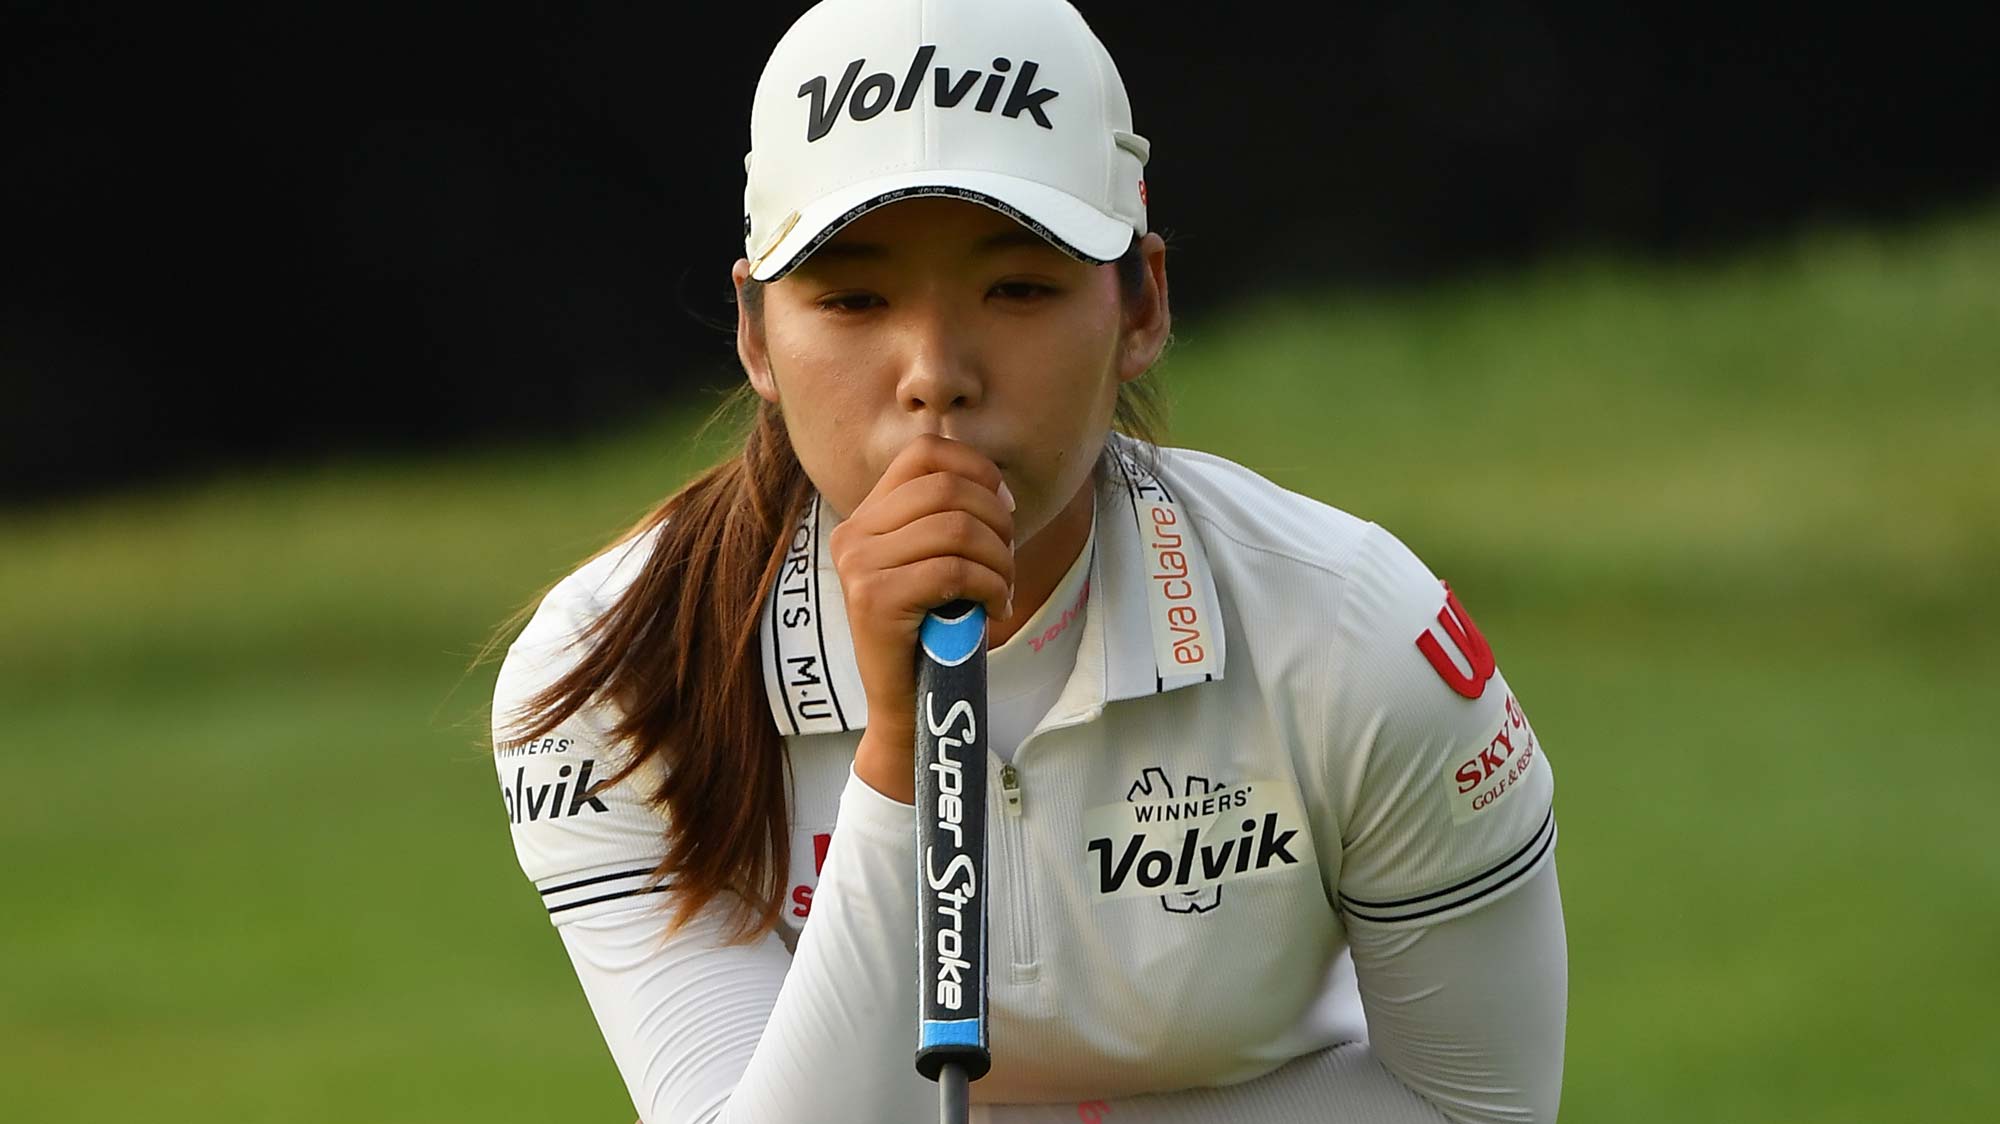 Mi Hyang Lee of Korean lines up a putt during day 1 of the Evian Championship